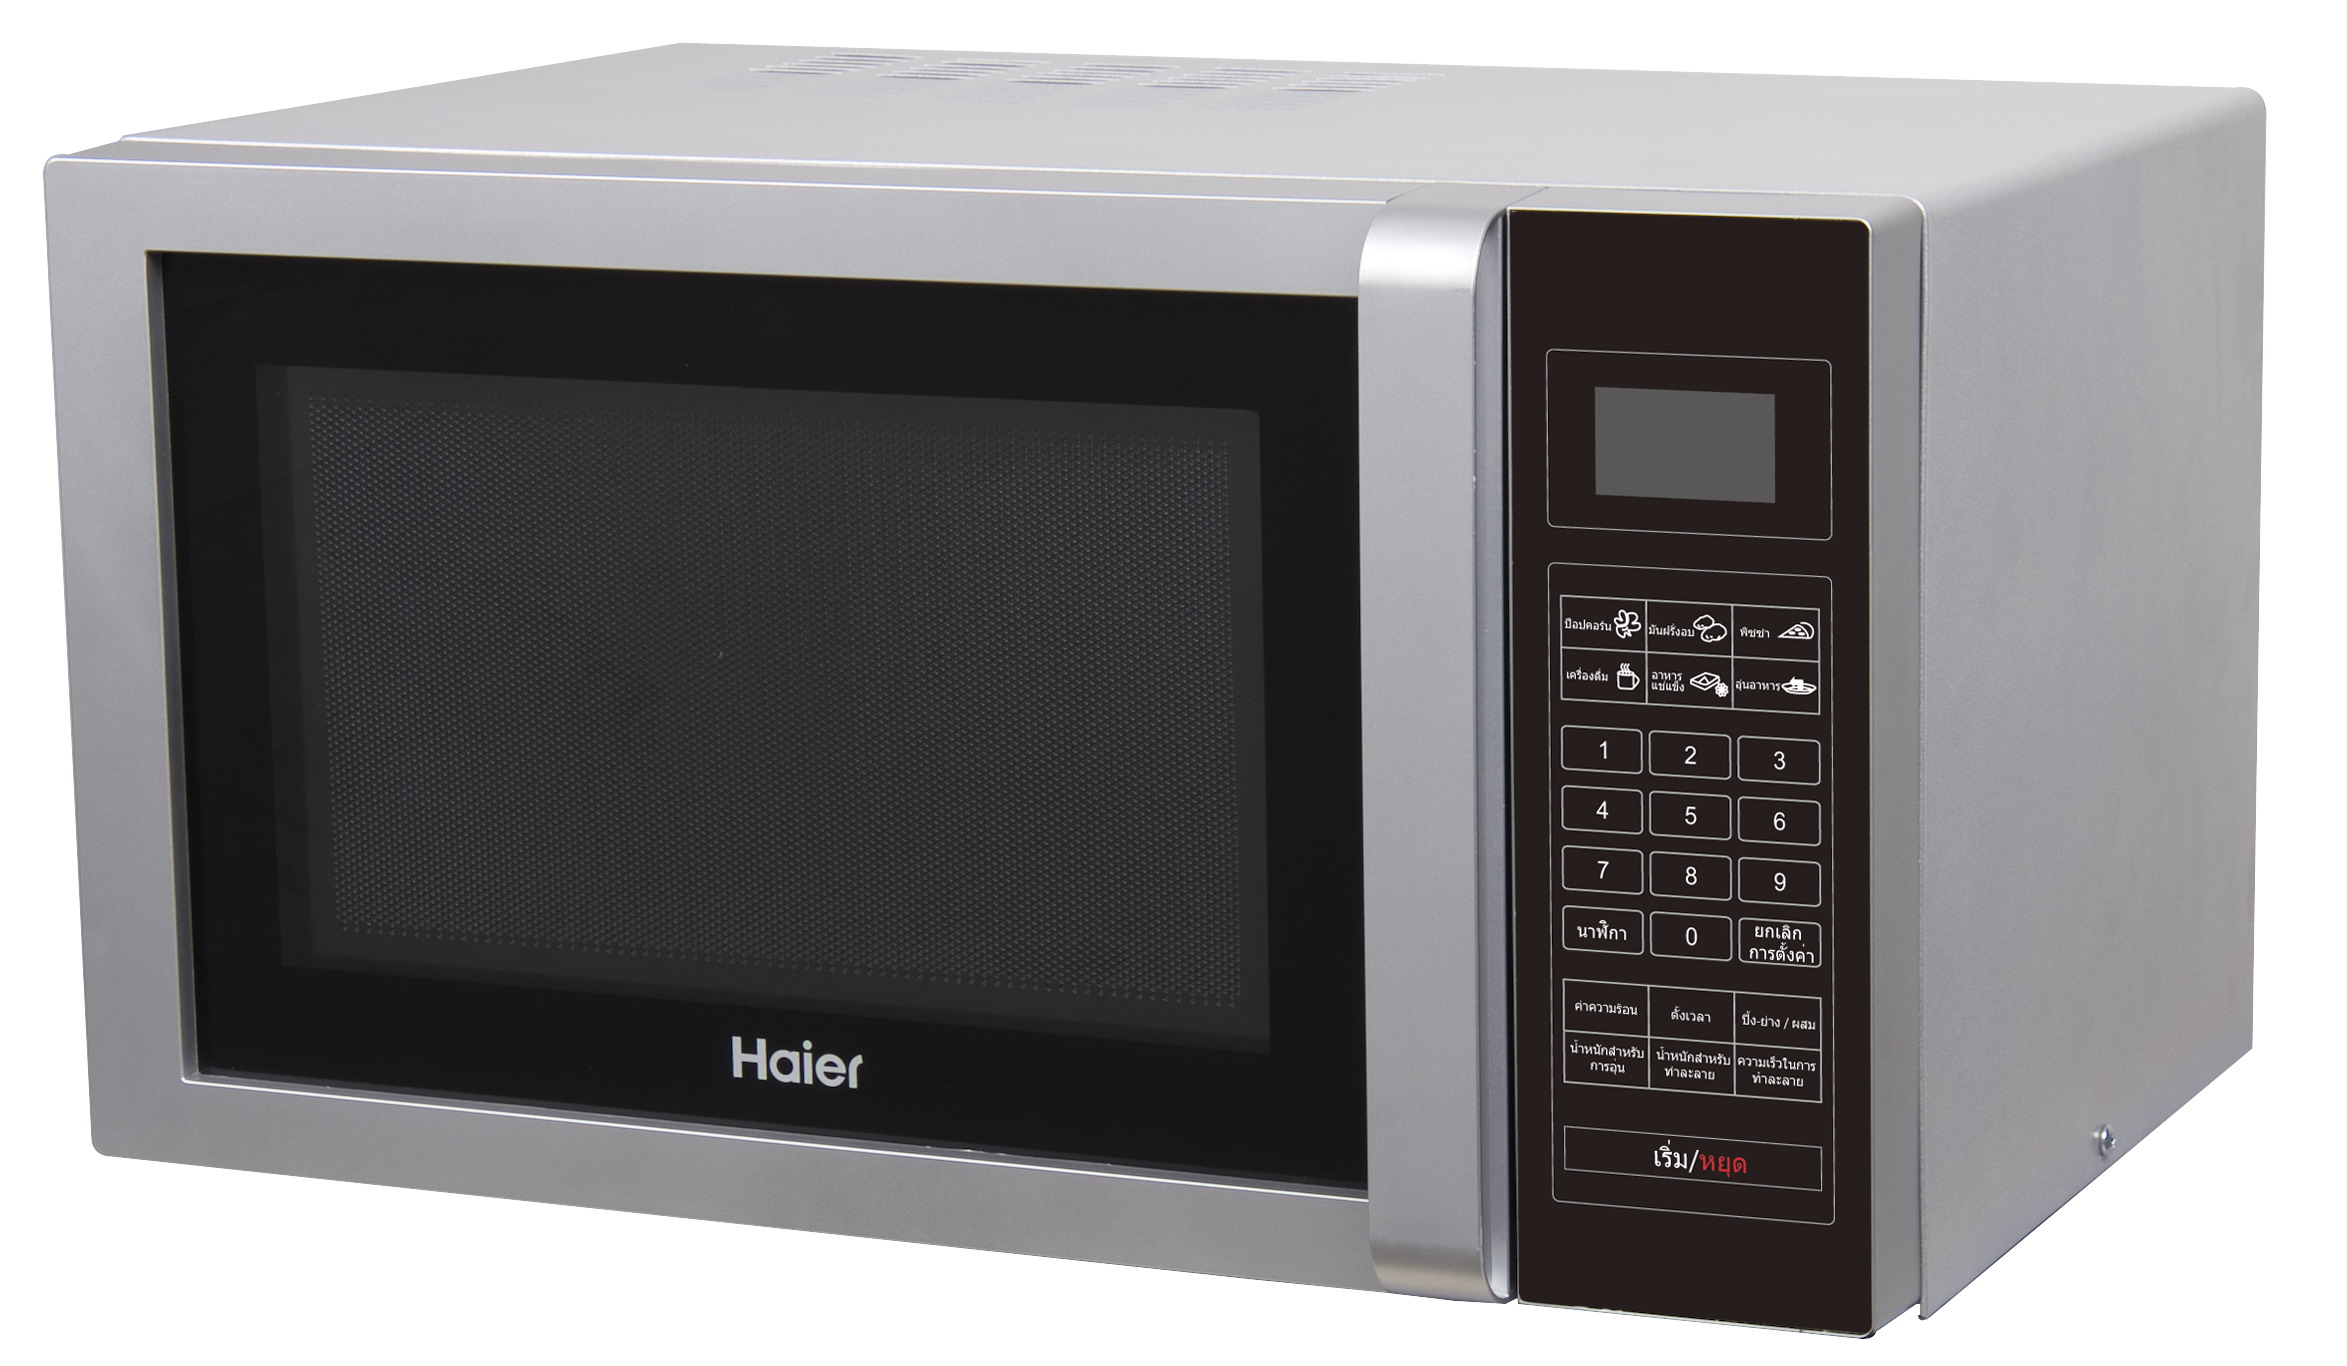 Microwave Oven - 6 Automatic Menu/Silver Appearance/Plastic Handle